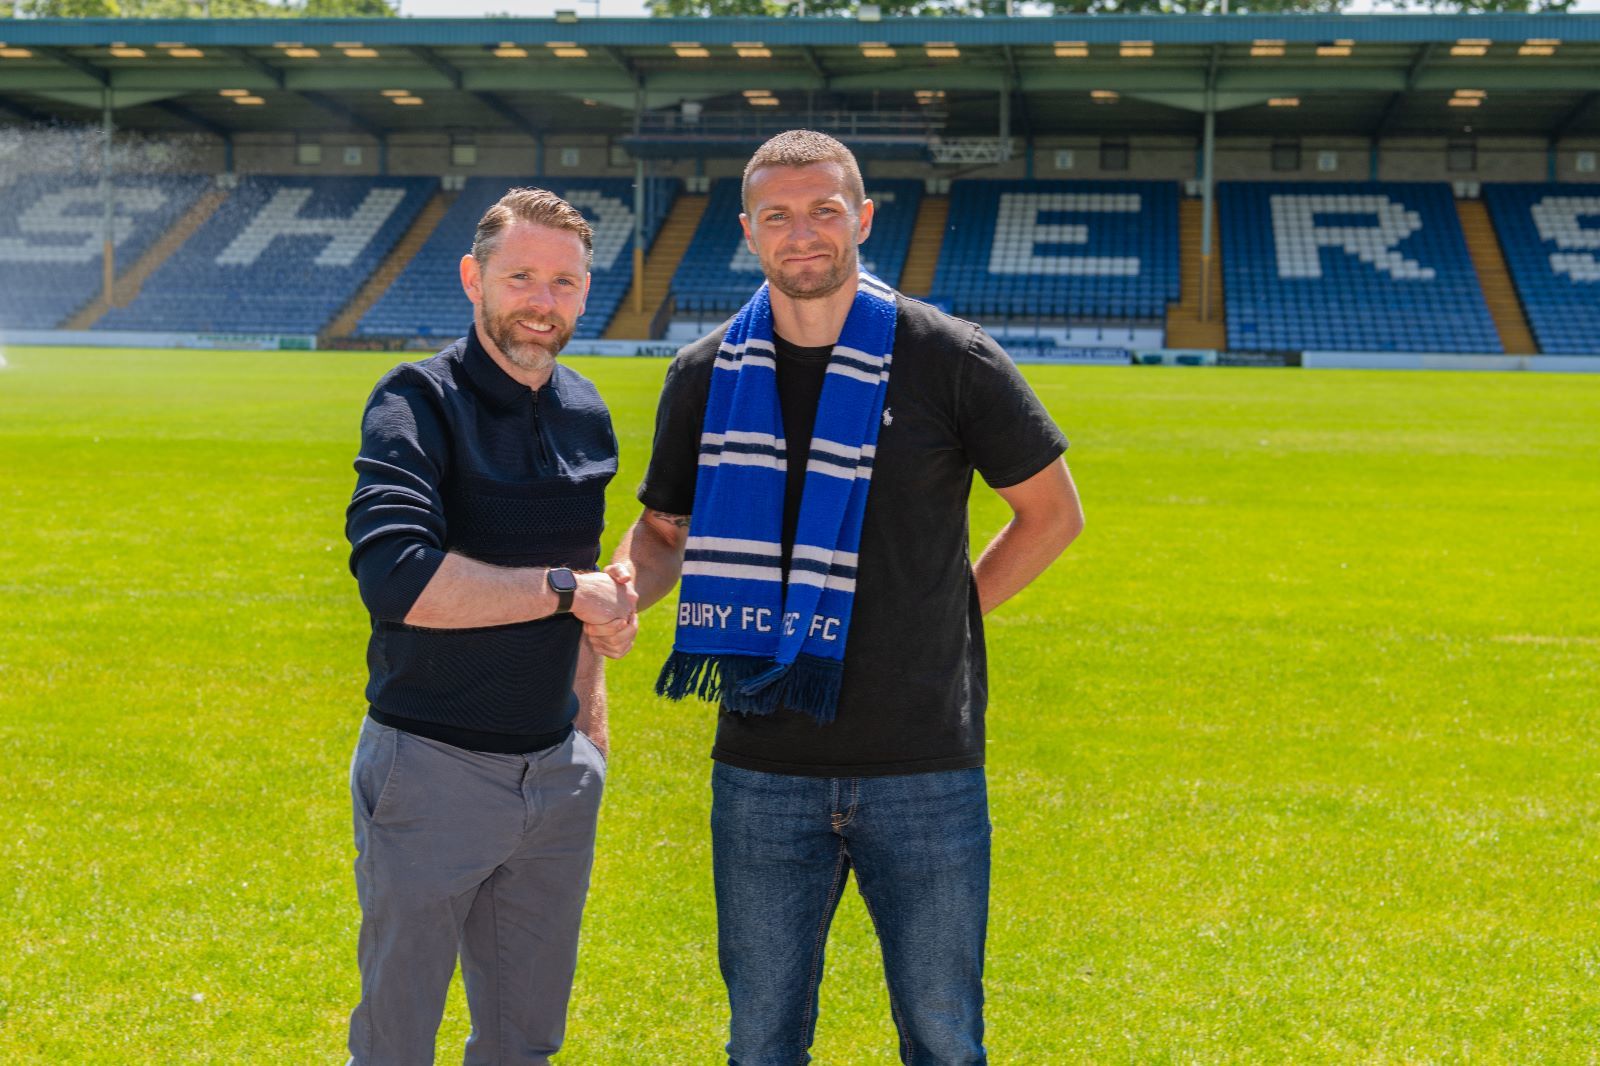 Bury FC boss Andy Welsh signs five new players